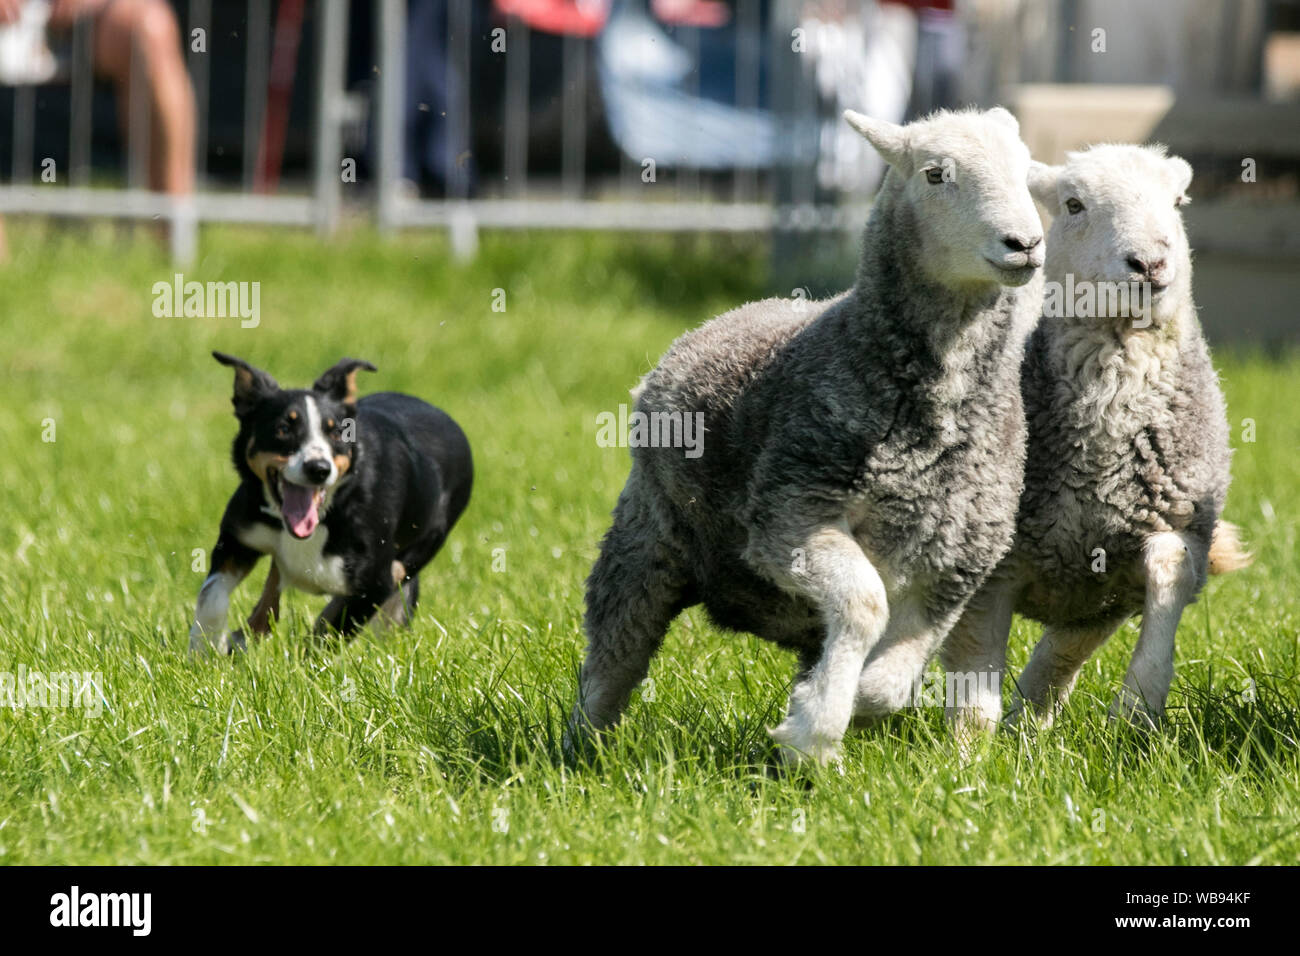 A border collie sheep dog herding exhibition Lake District Herdwick Sheep at the Chipping Agriculture show in Lancashire, UK Stock Photo